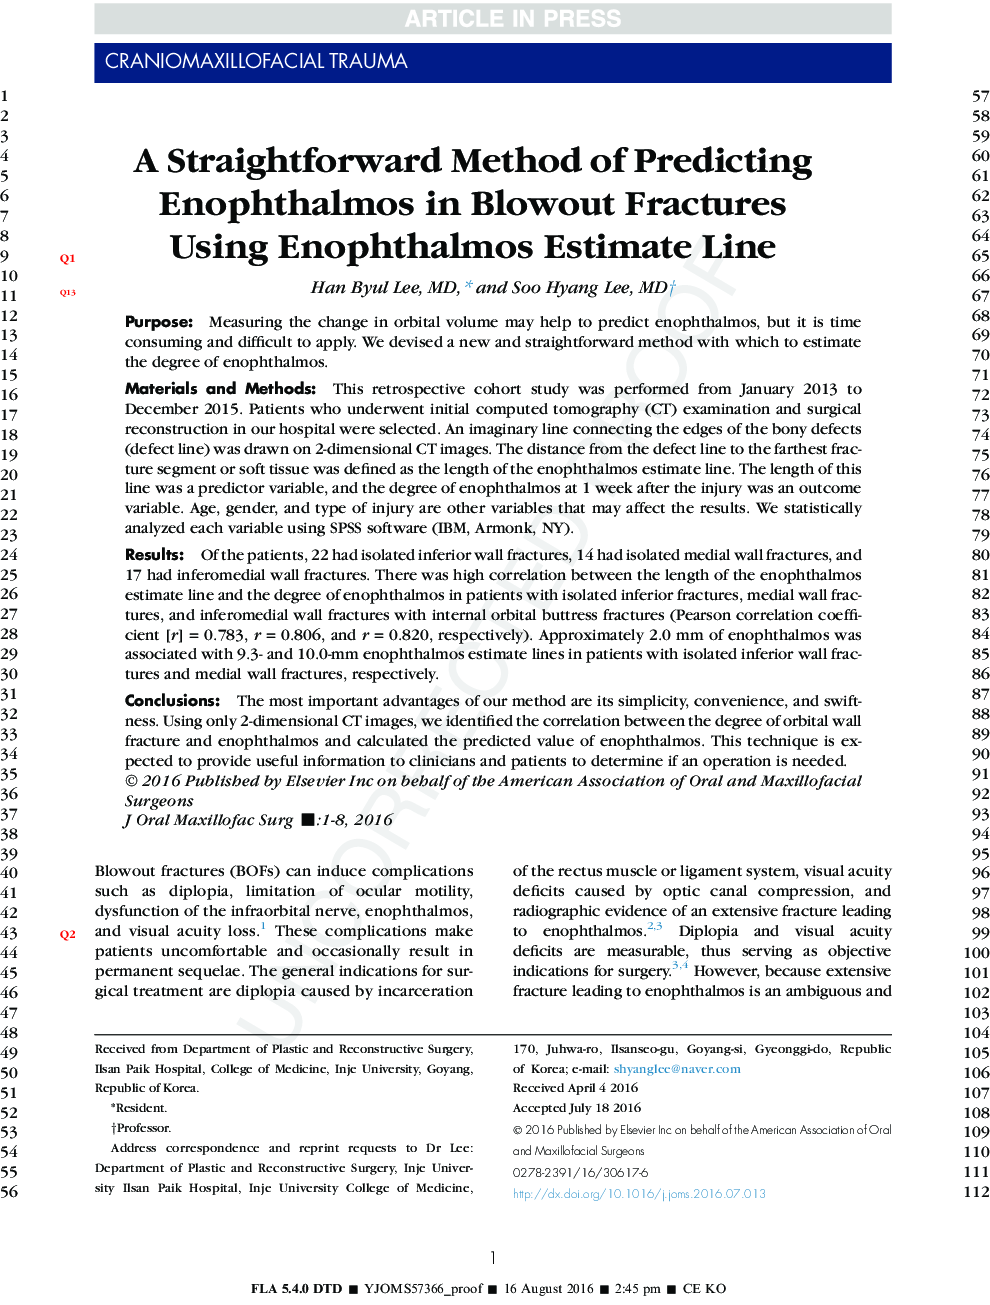 A Straightforward Method of Predicting Enophthalmos in Blowout Fractures Using Enophthalmos Estimate Line